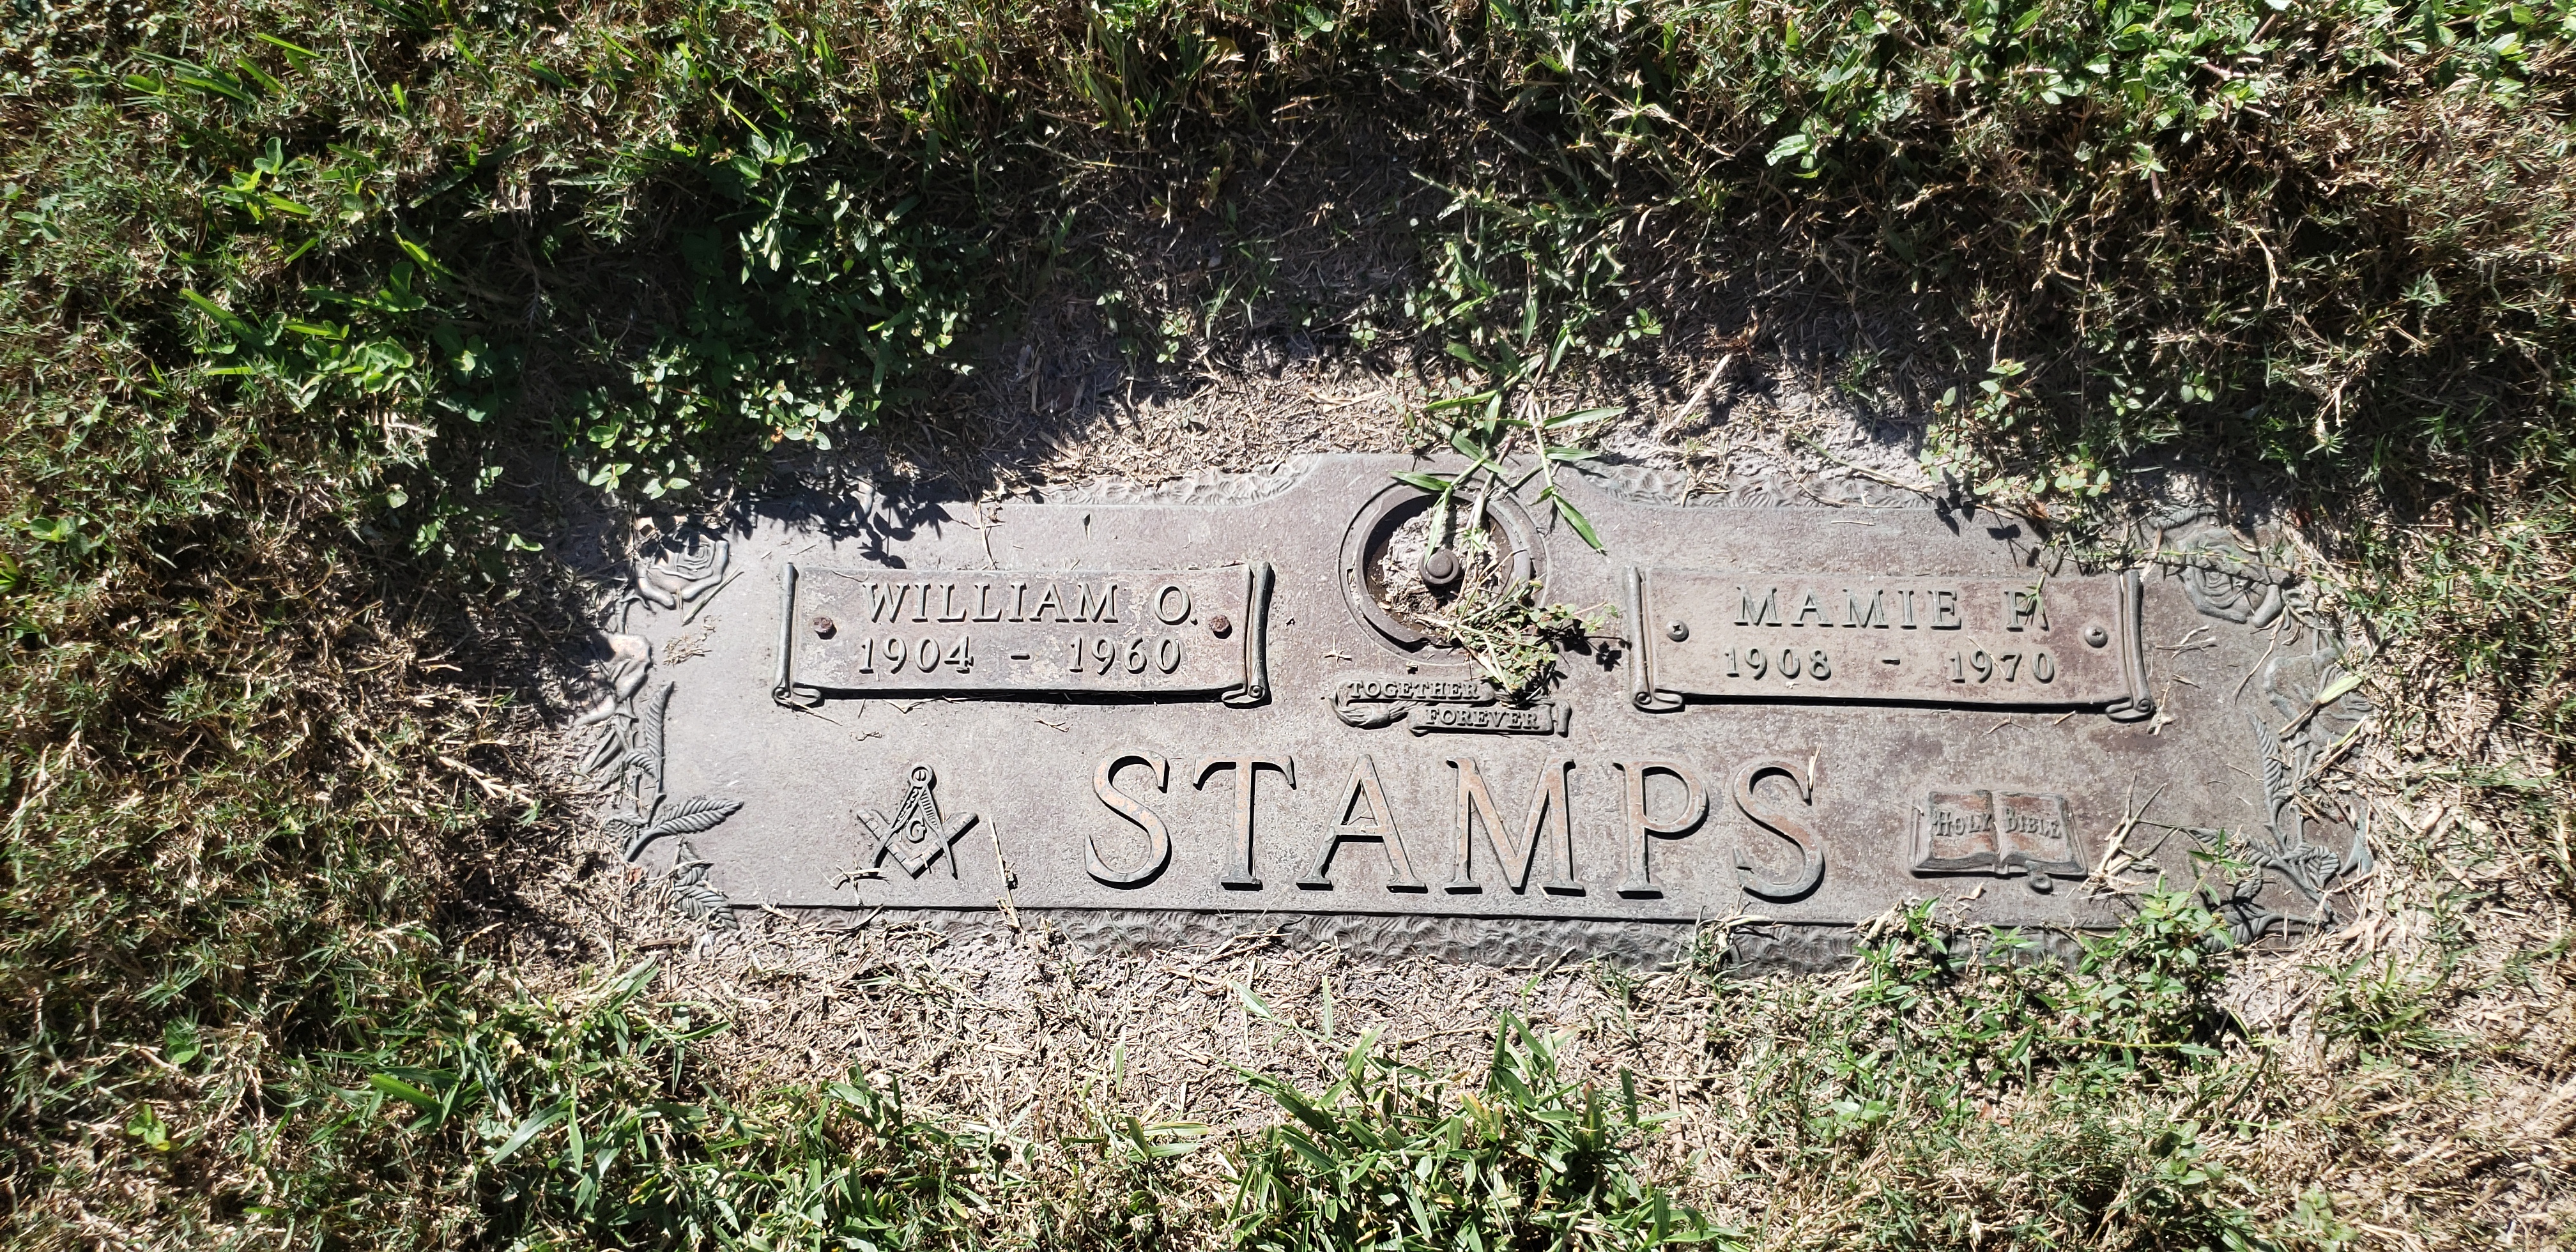 Mamie P Stamps